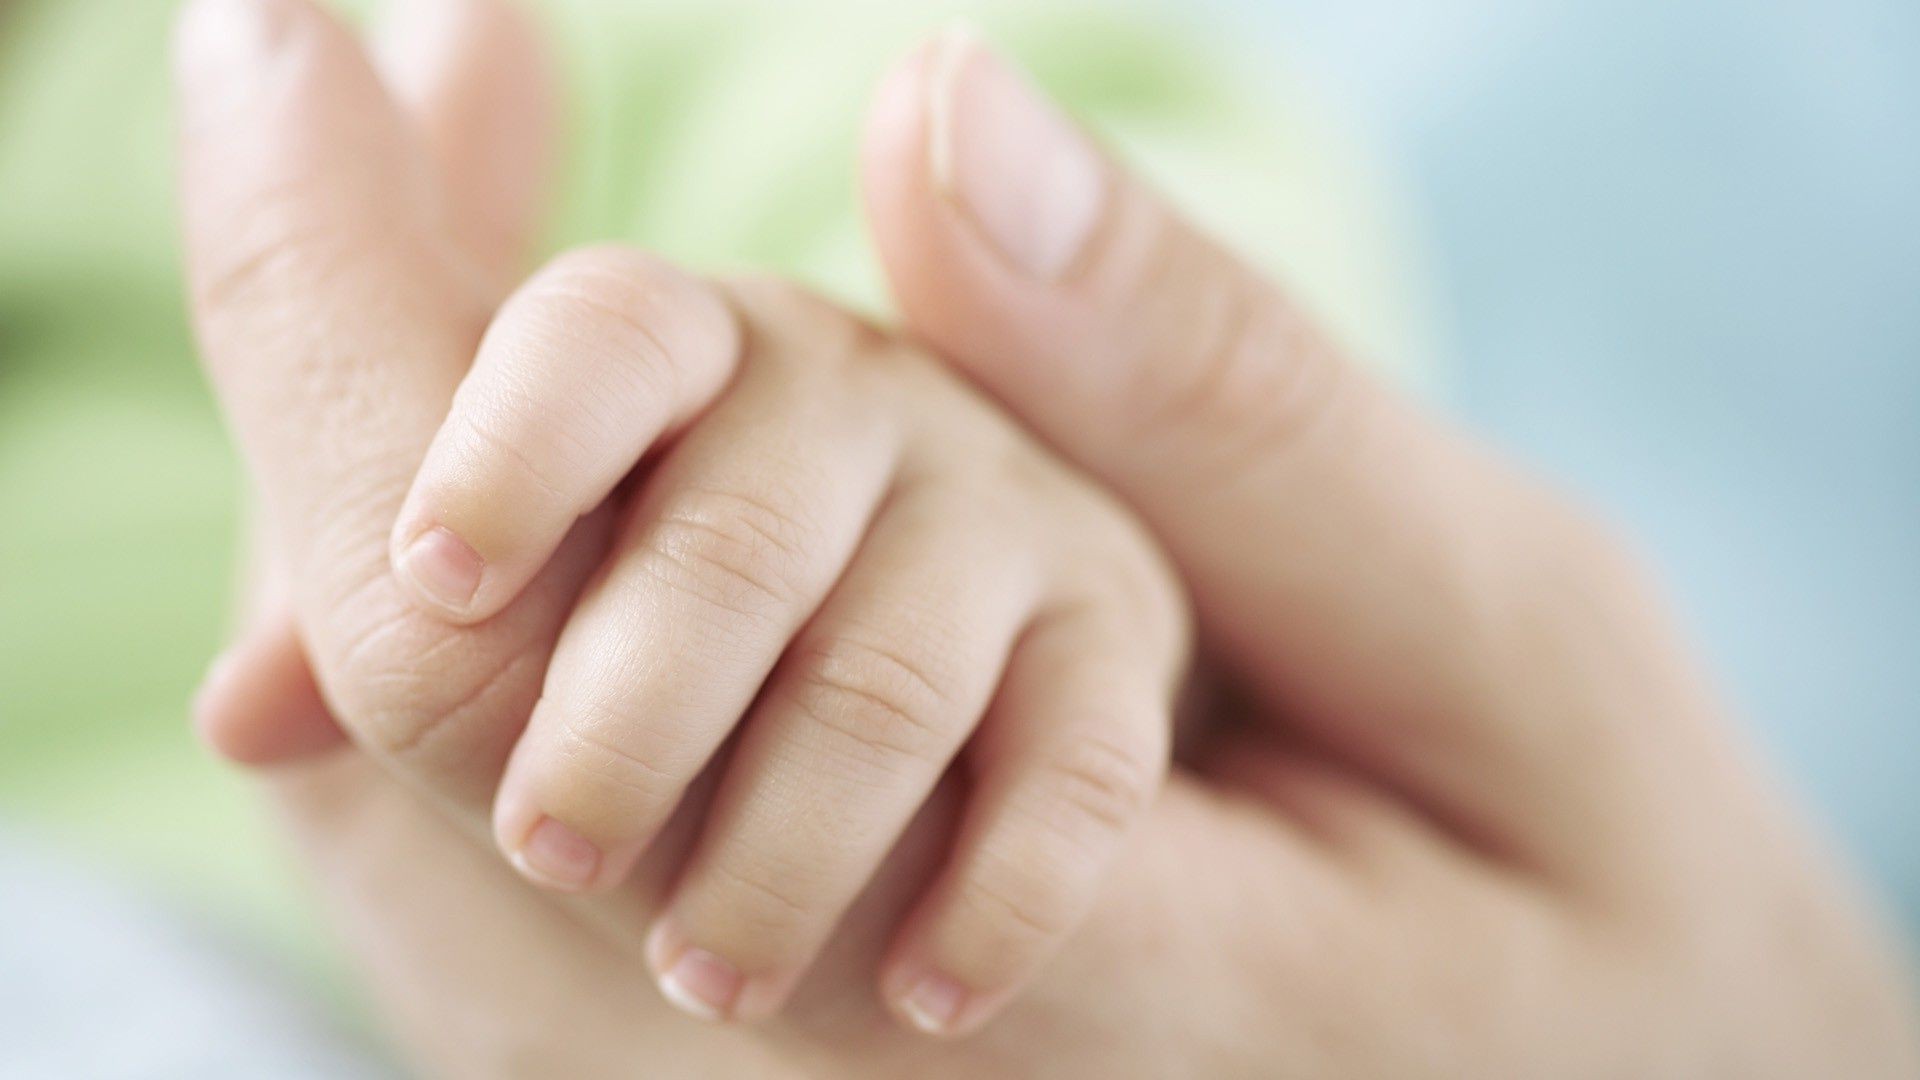 macro baby tiny foot skin hand newborn woman touch love little unity support finger trust innocence relaxation child care blur